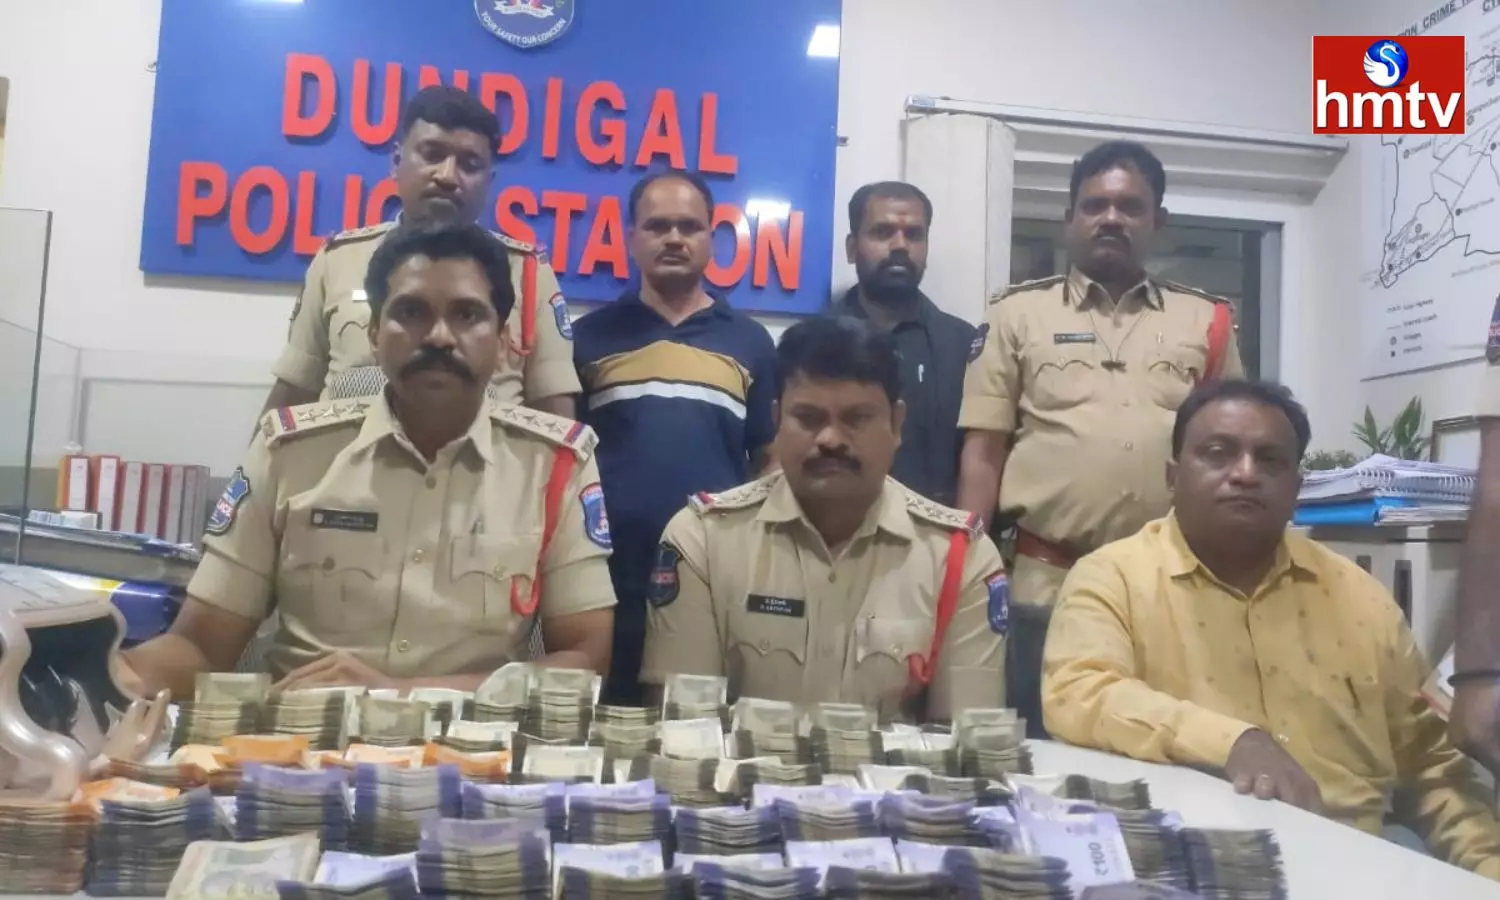 17 Lakh Cash Was Seized By The Police In Quthbullapur